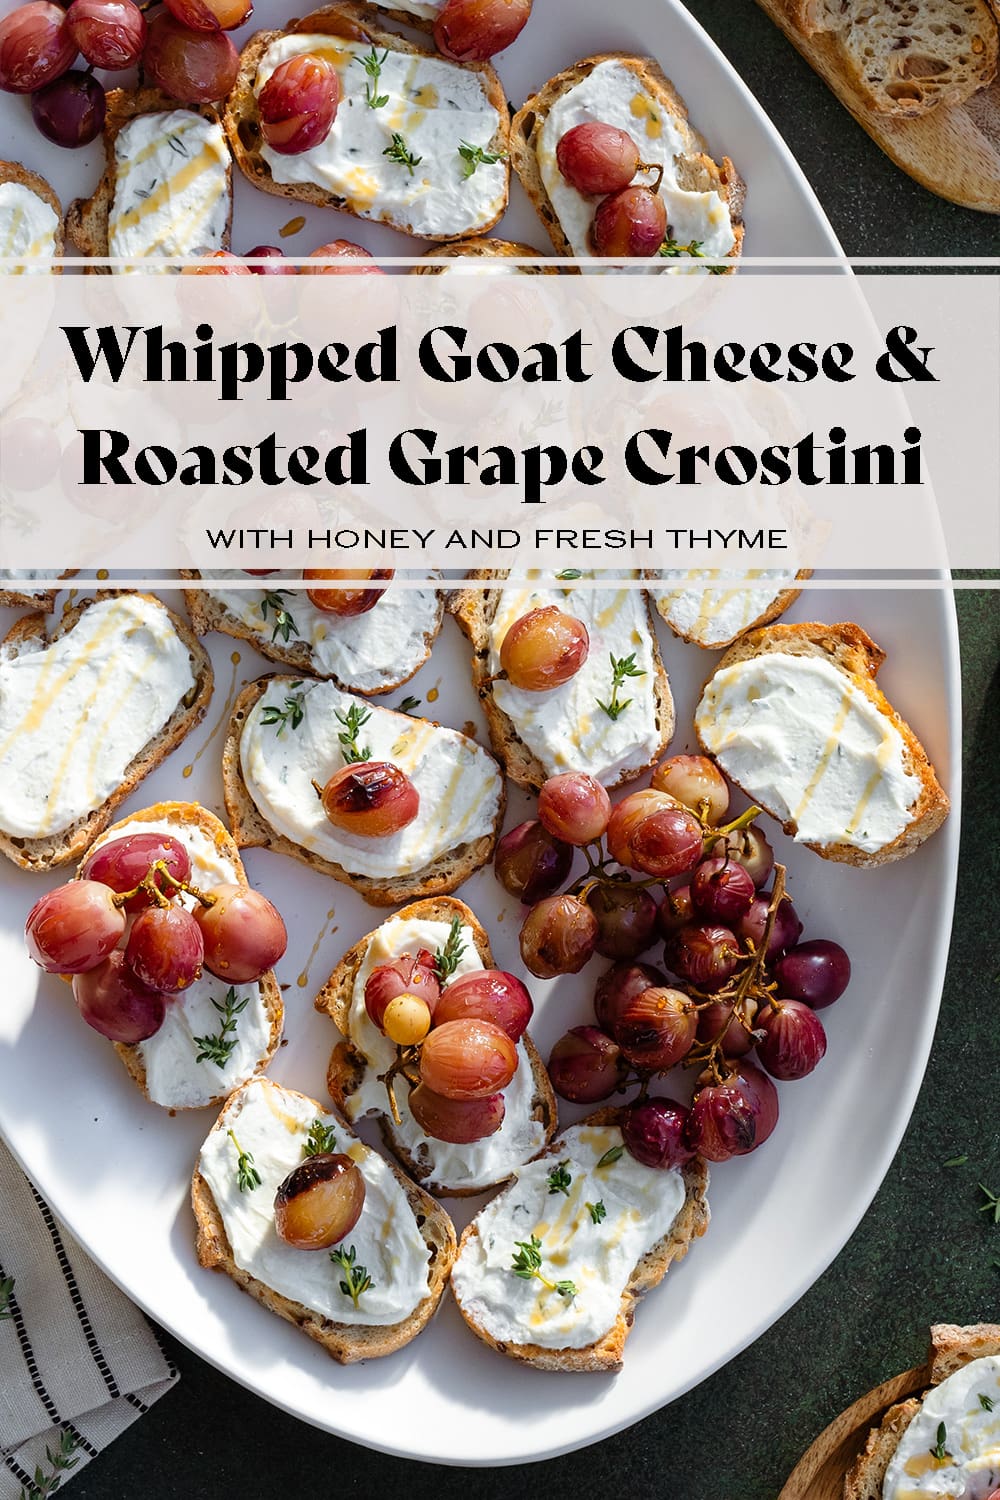 Whipped Goat Cheese Crostini with Roasted Grapes